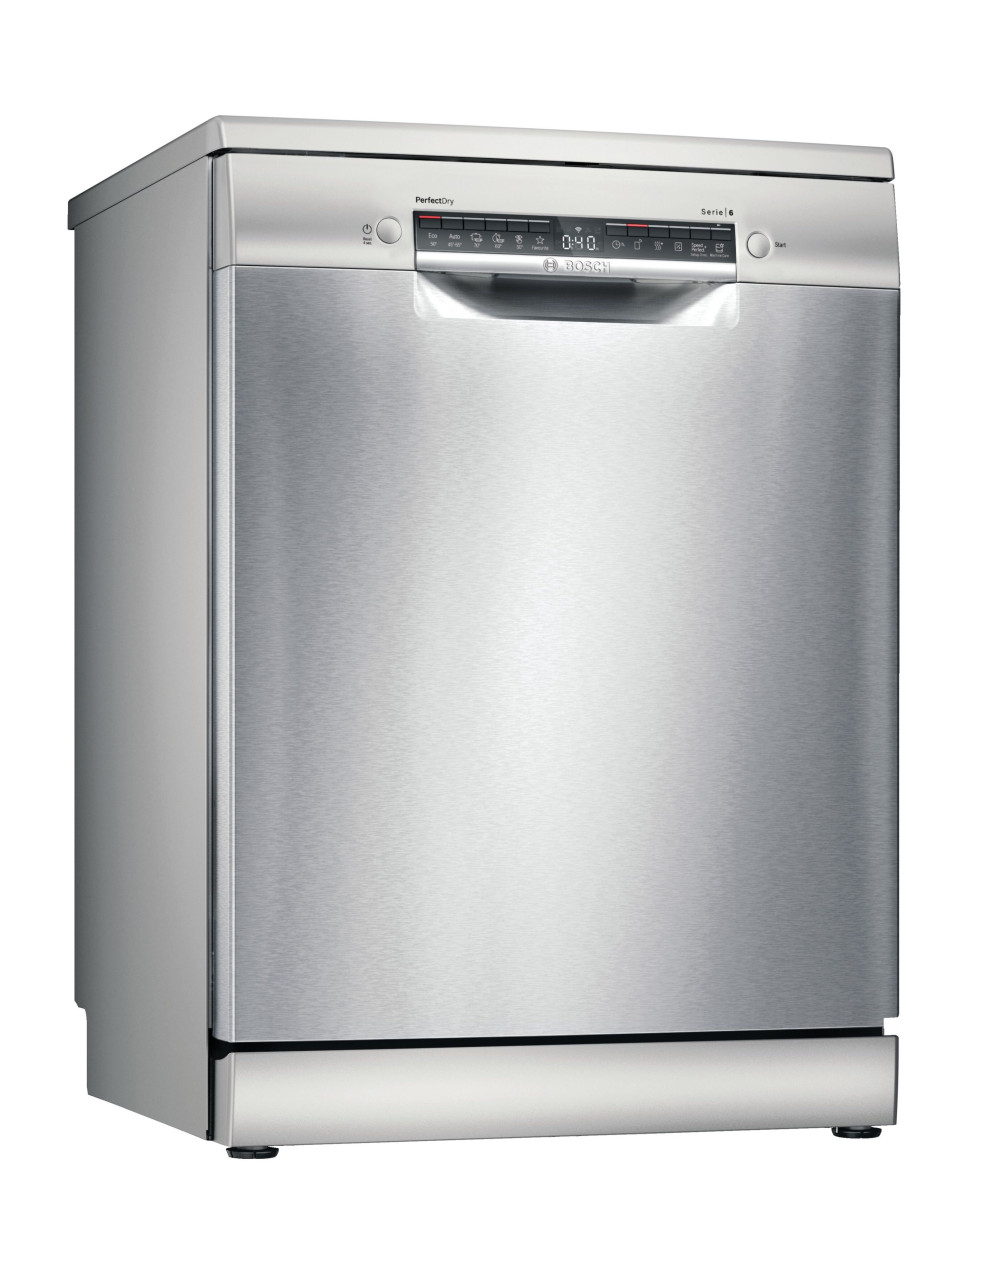 Bosch SMS6TCI00E Series 6 Freestanding Dishwasher featured image